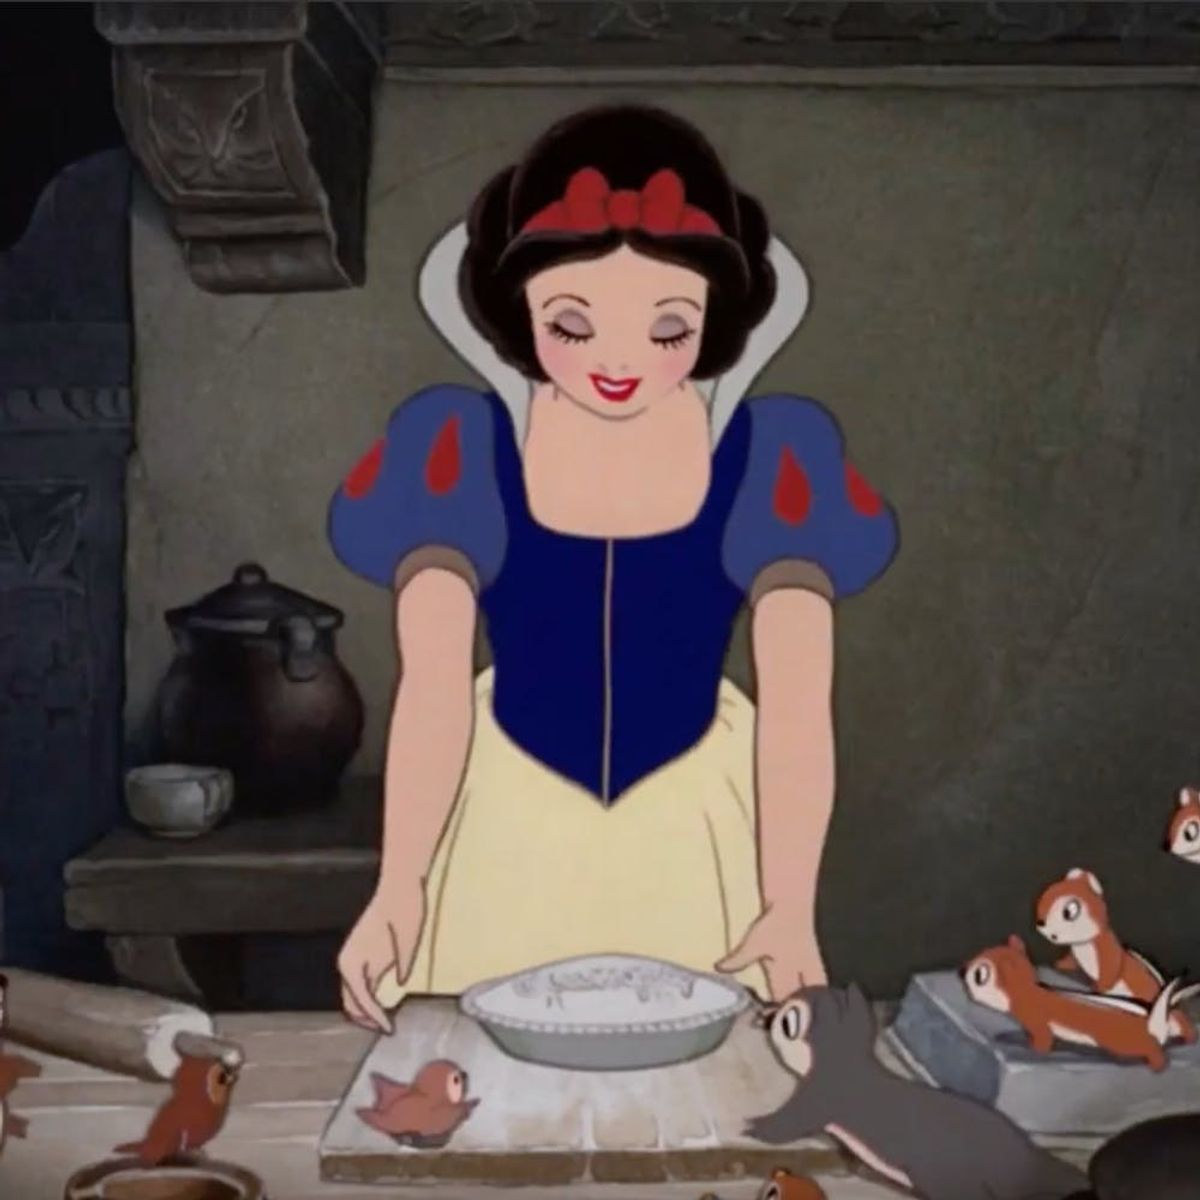 Le Creuset’s New Snow White Dutch Ovens Are So Cute, You’ll Wanna Take a Bite Out of One